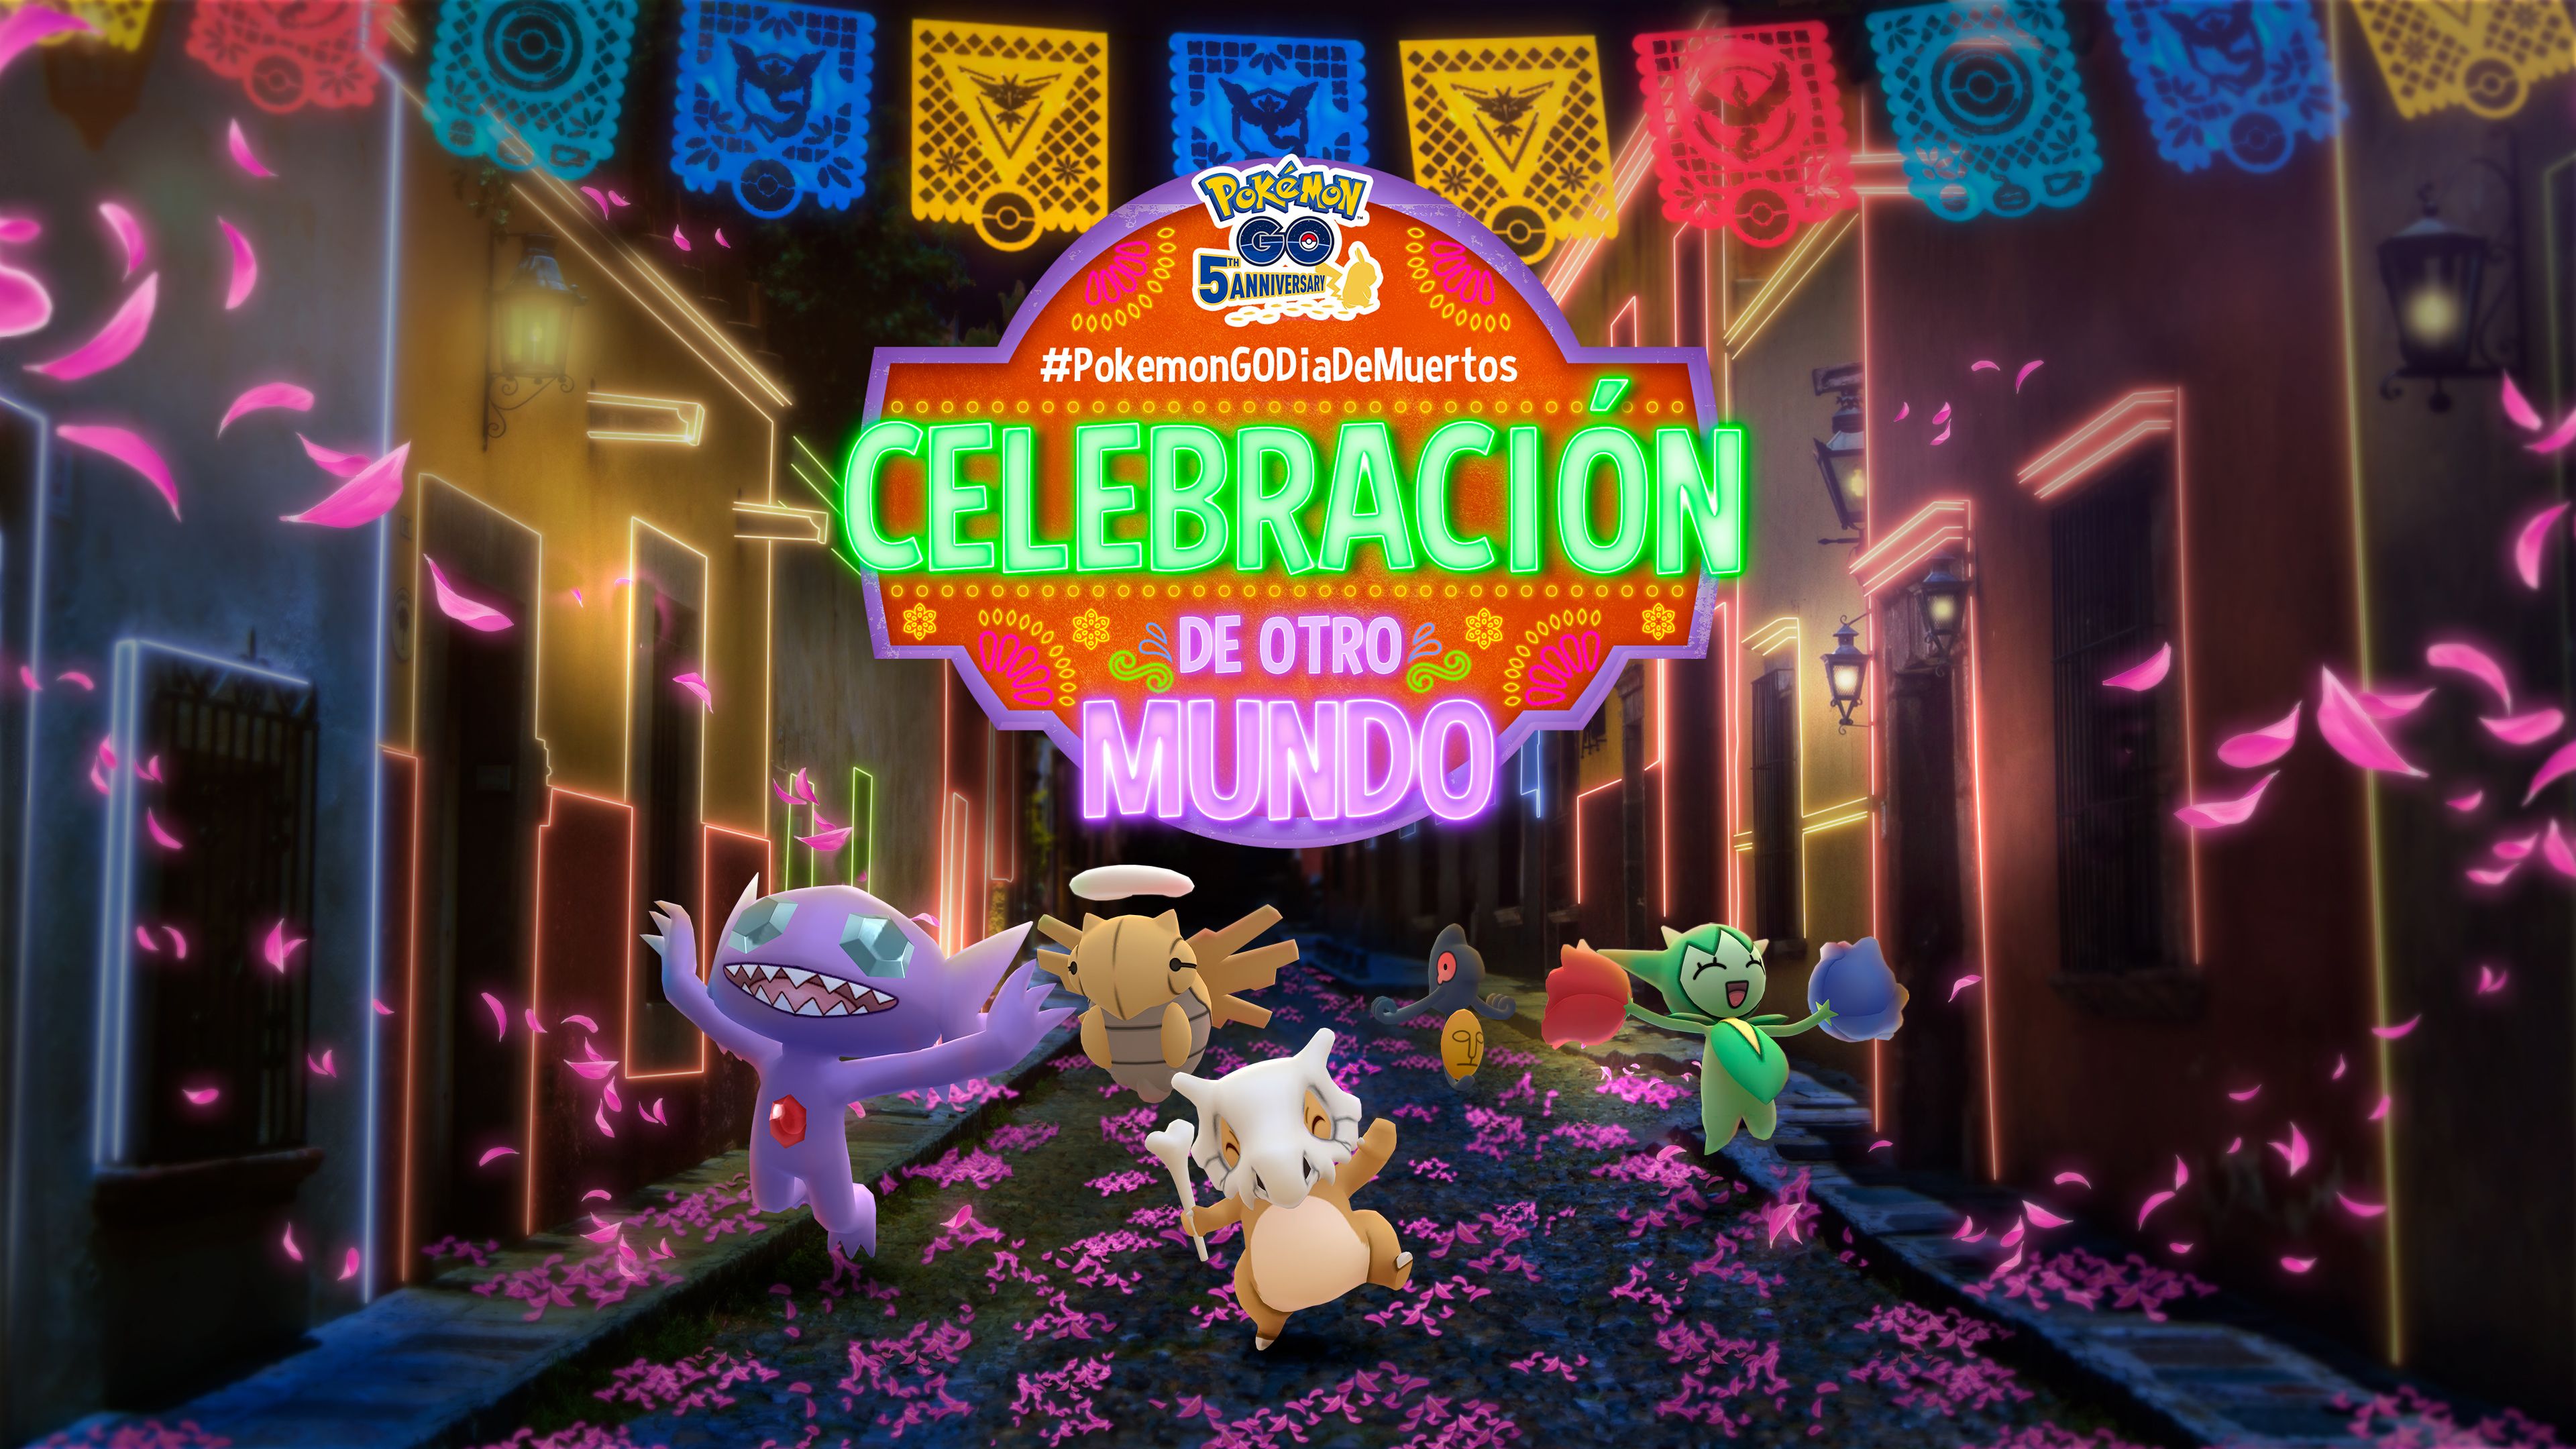 This Week In Pokemon Go Día de Muertos Festival of Lights New Raid Bosses And More